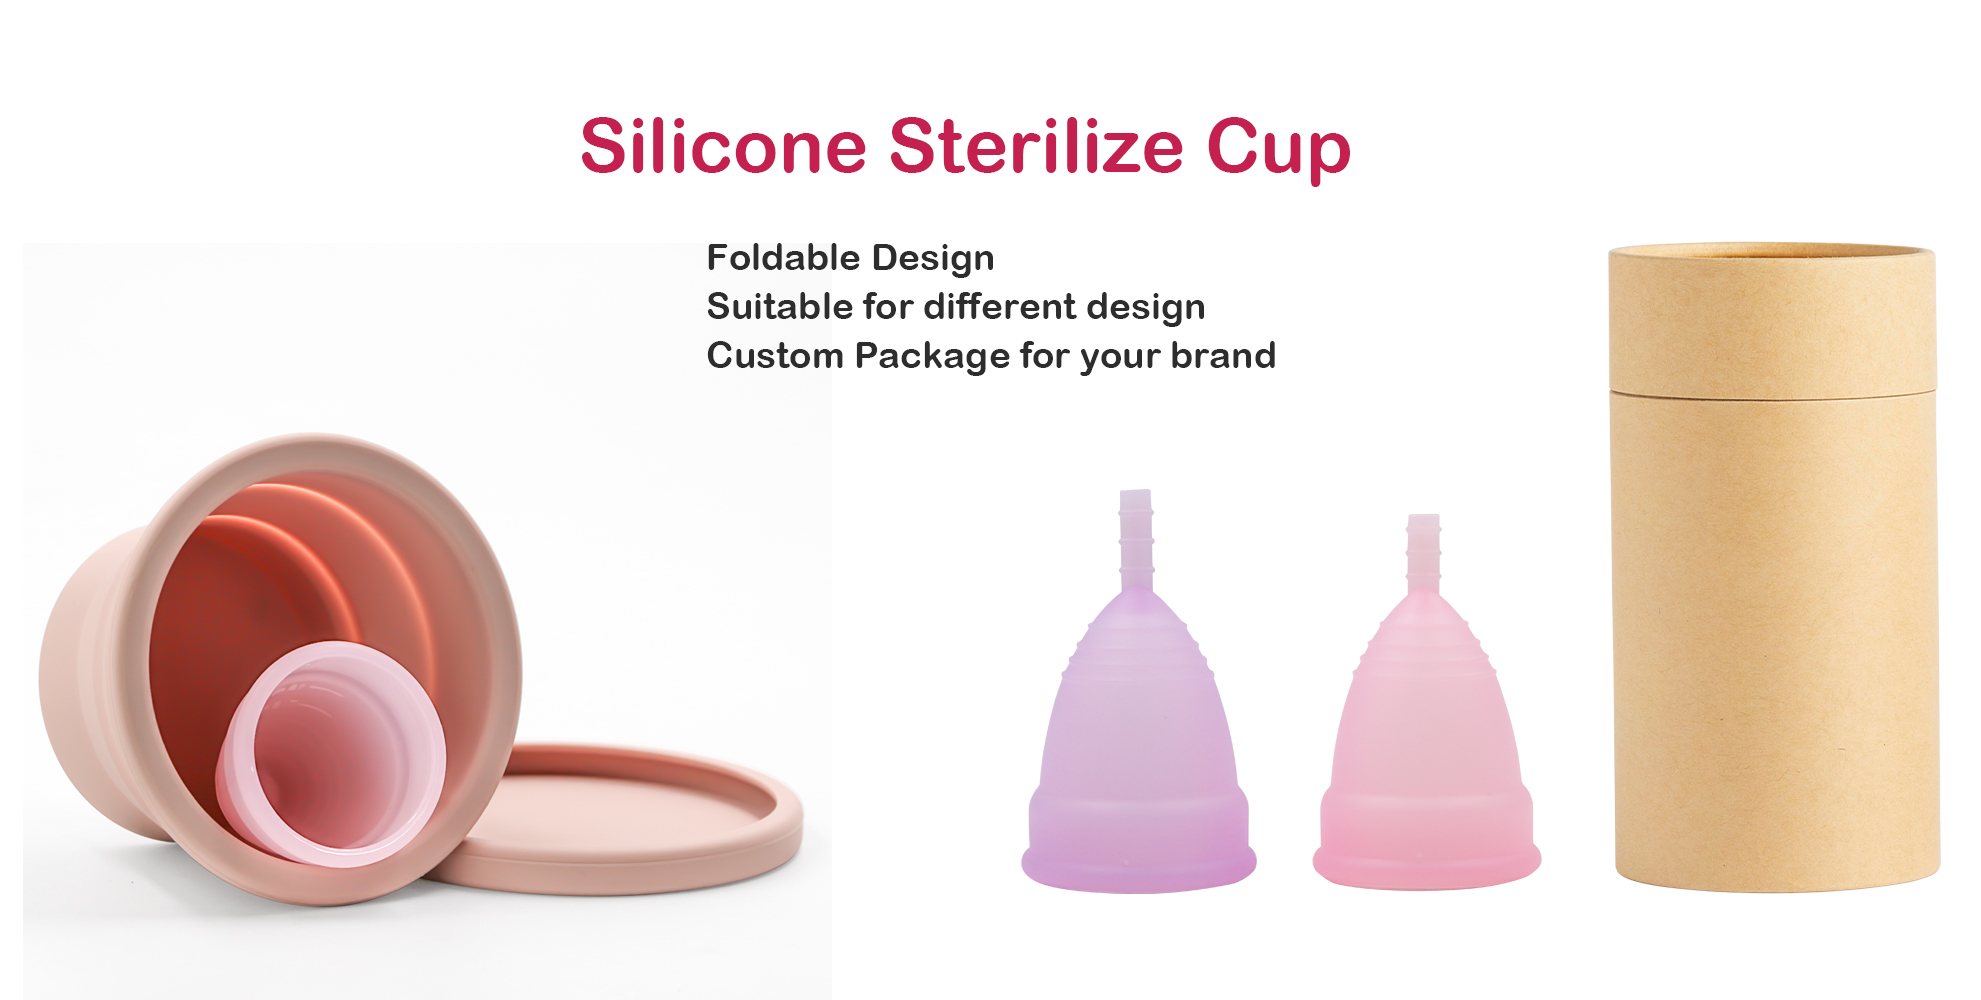 Reusable Menstrual Cups ine Collapsible Silicone Foldable Sterilizing Cup